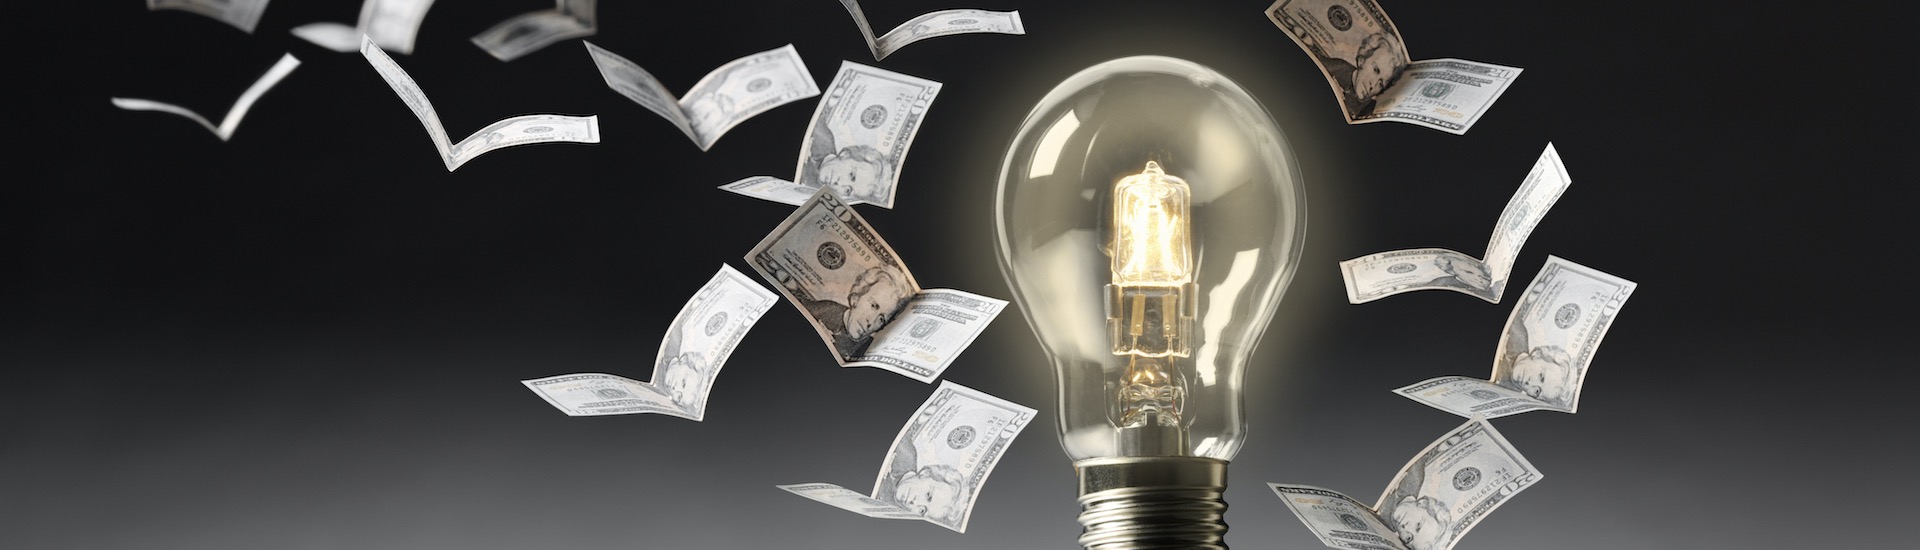 Lighting utility rebates recover costs lost due to inefficient incandescent bulbs